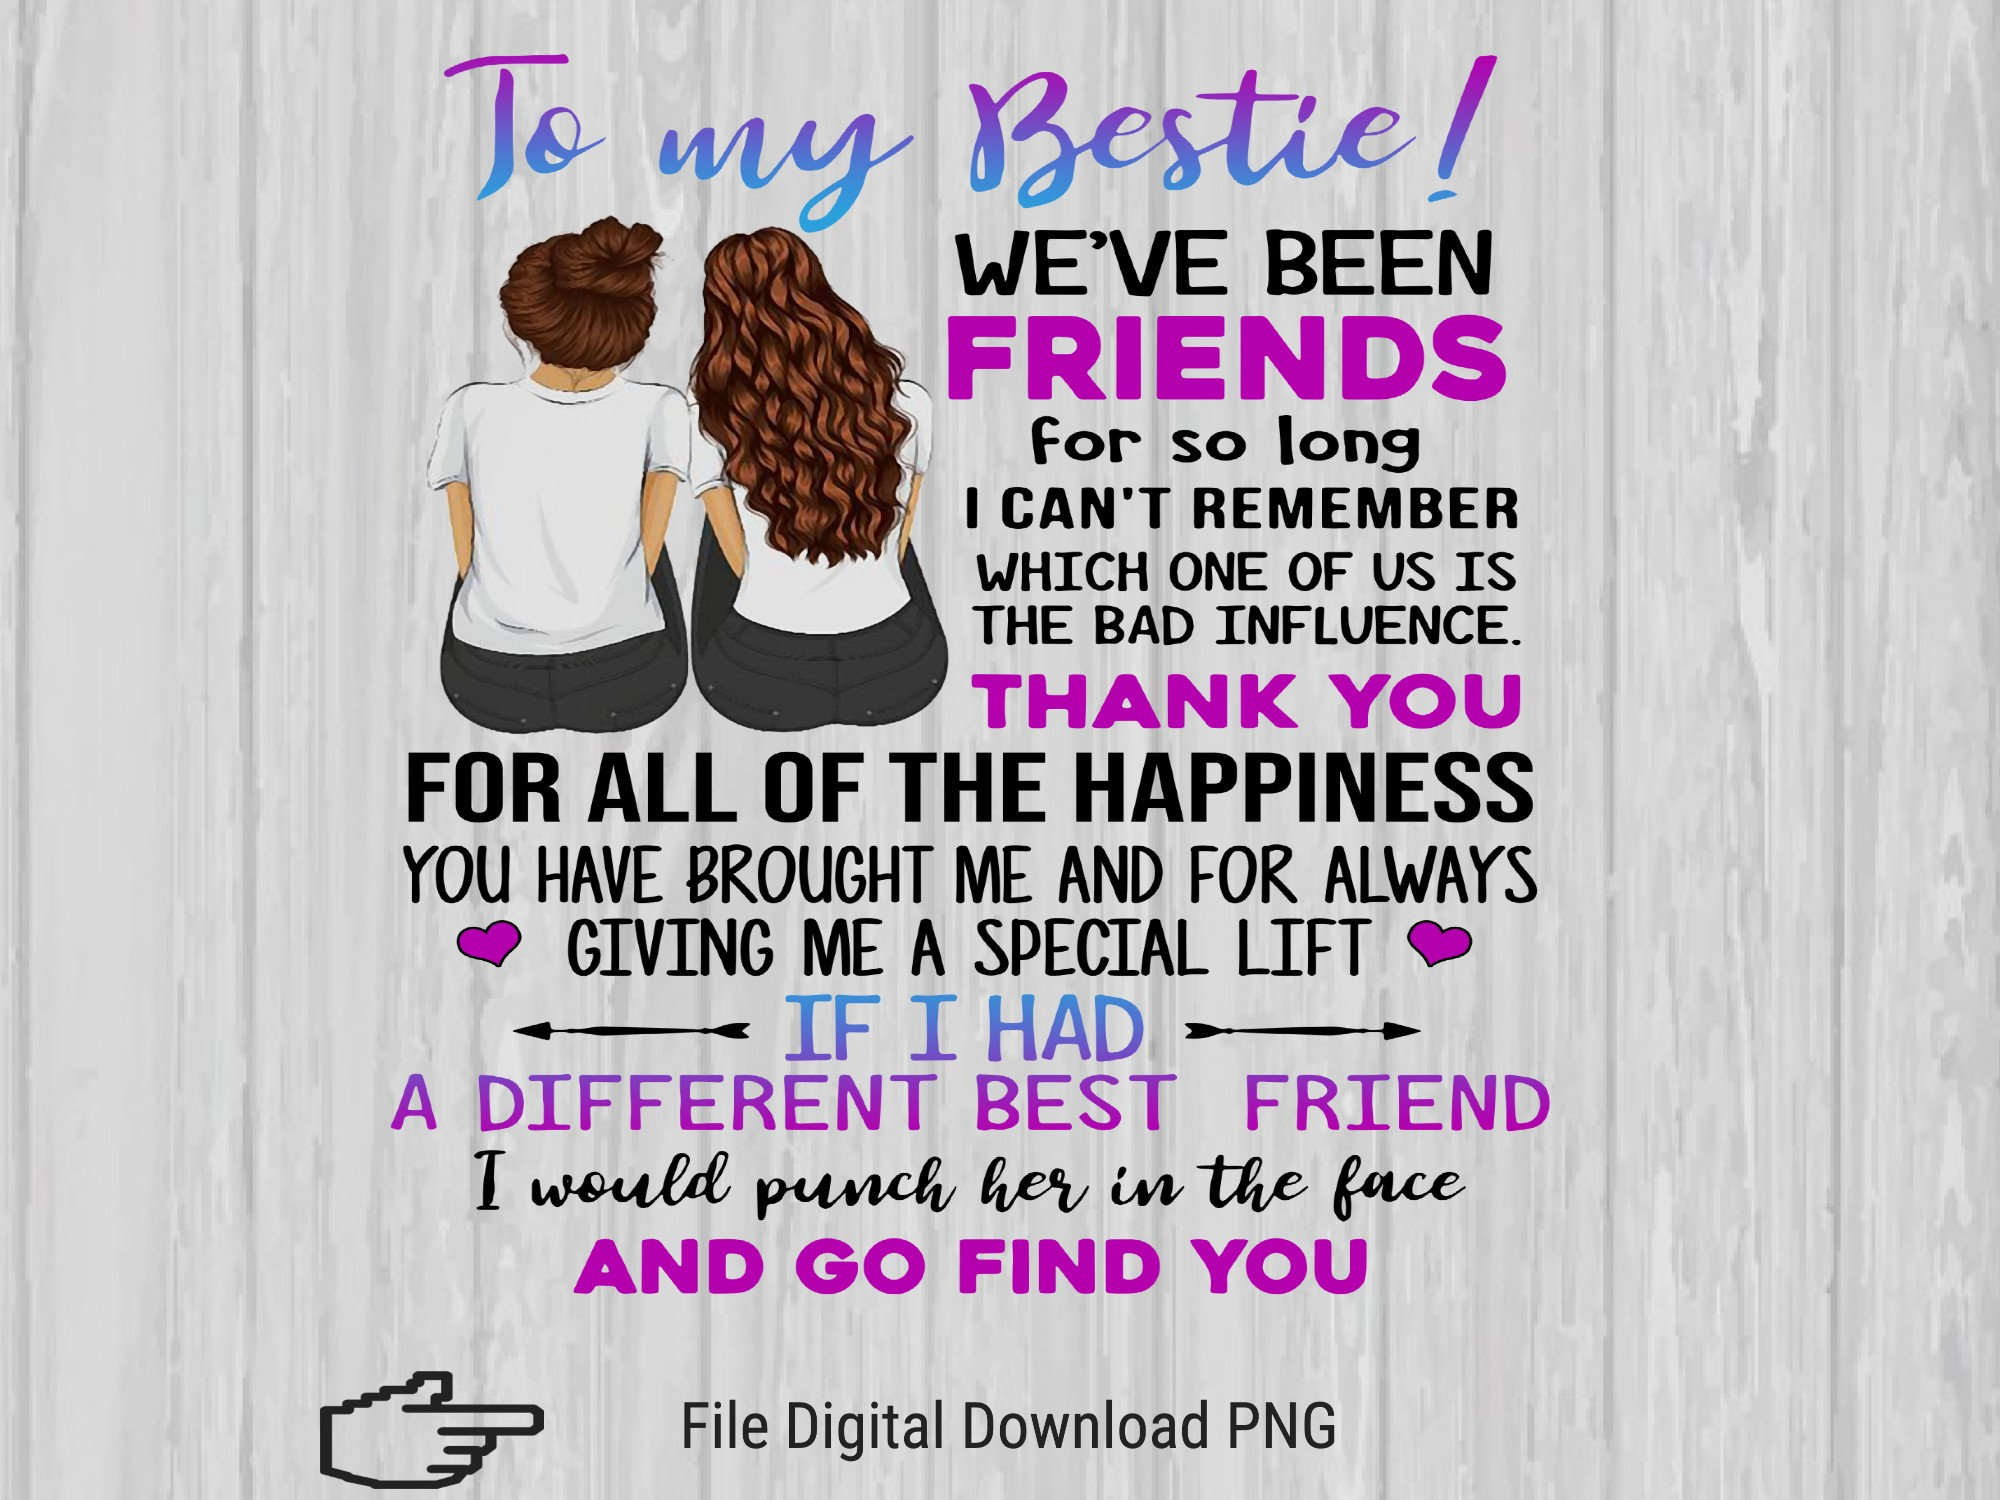 To my bestie we've been friends for so long i can't | Etsy